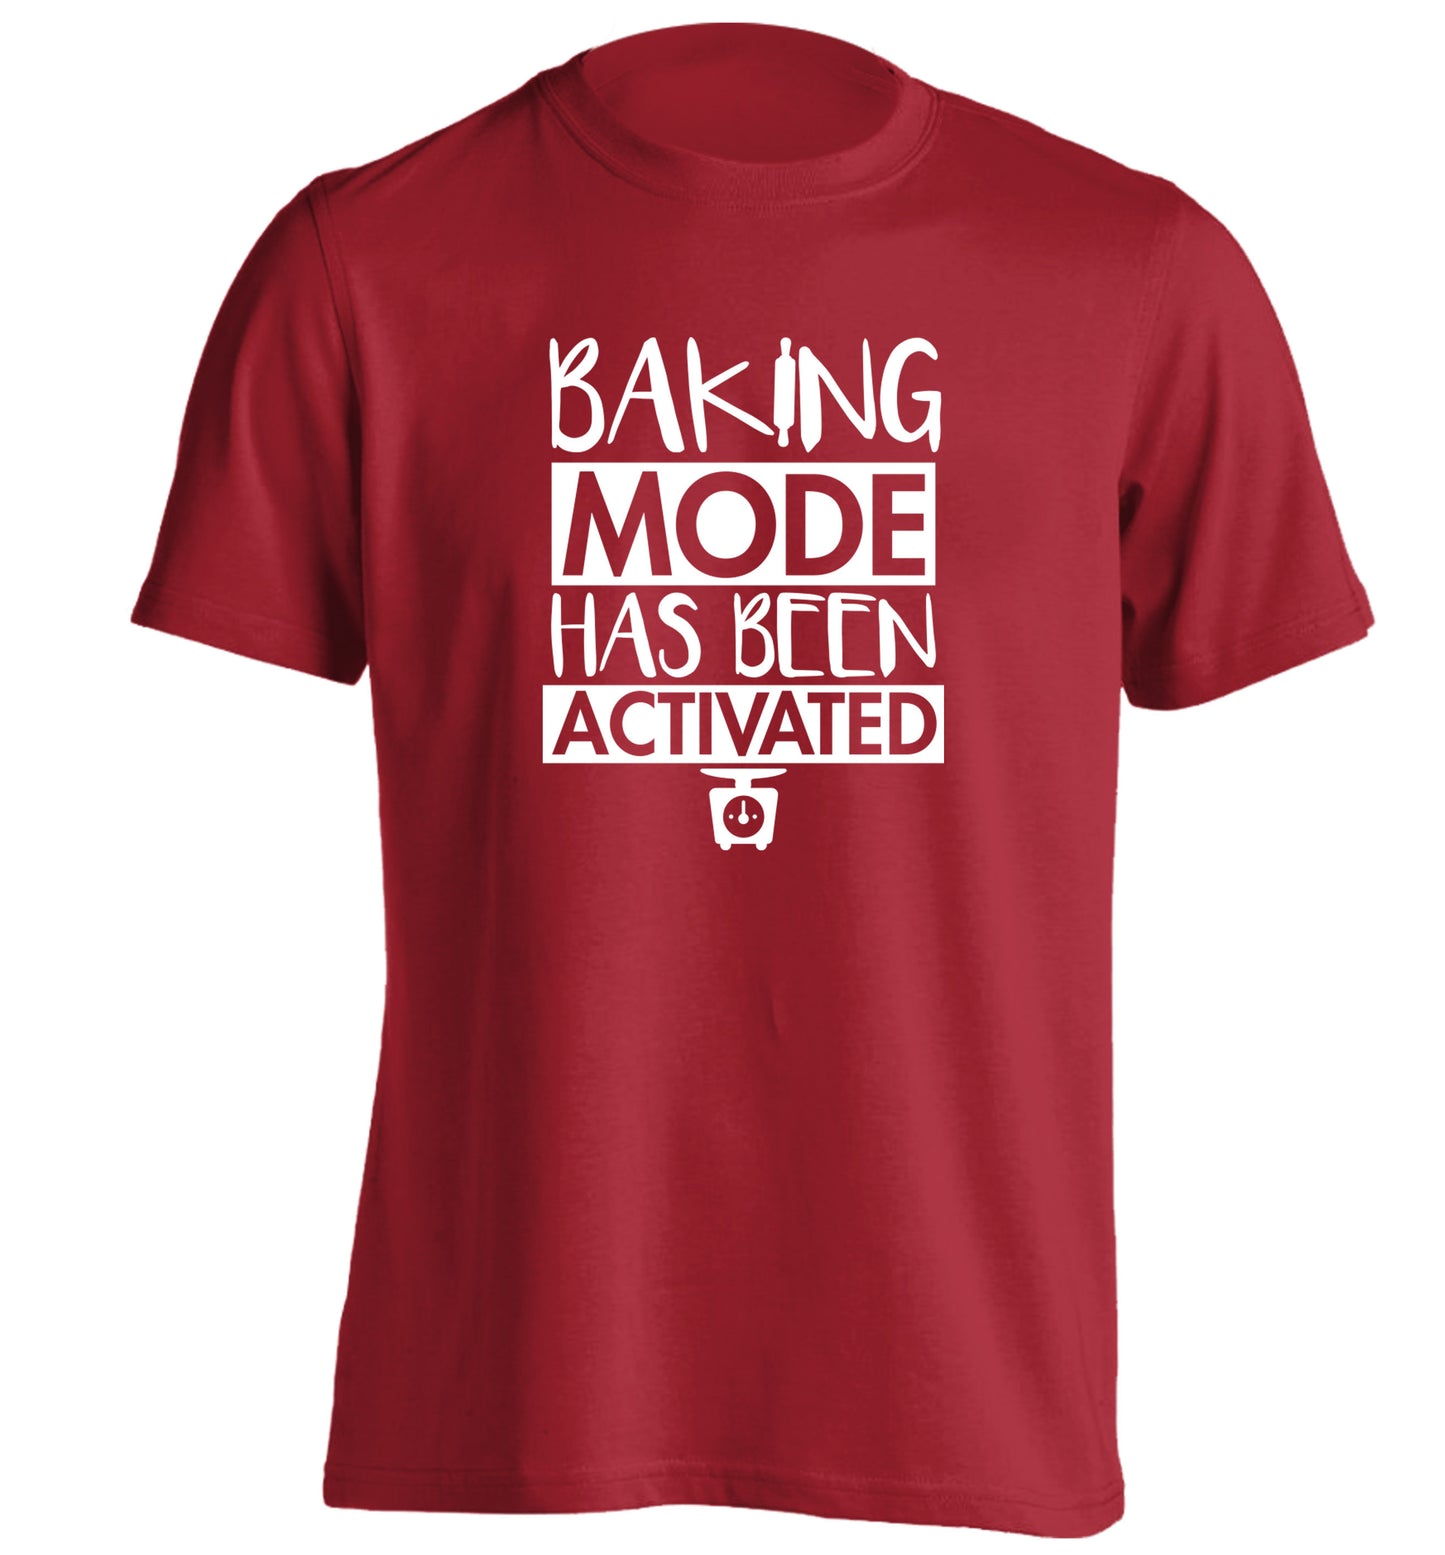 Baking mode has been activated adults unisex red Tshirt 2XL